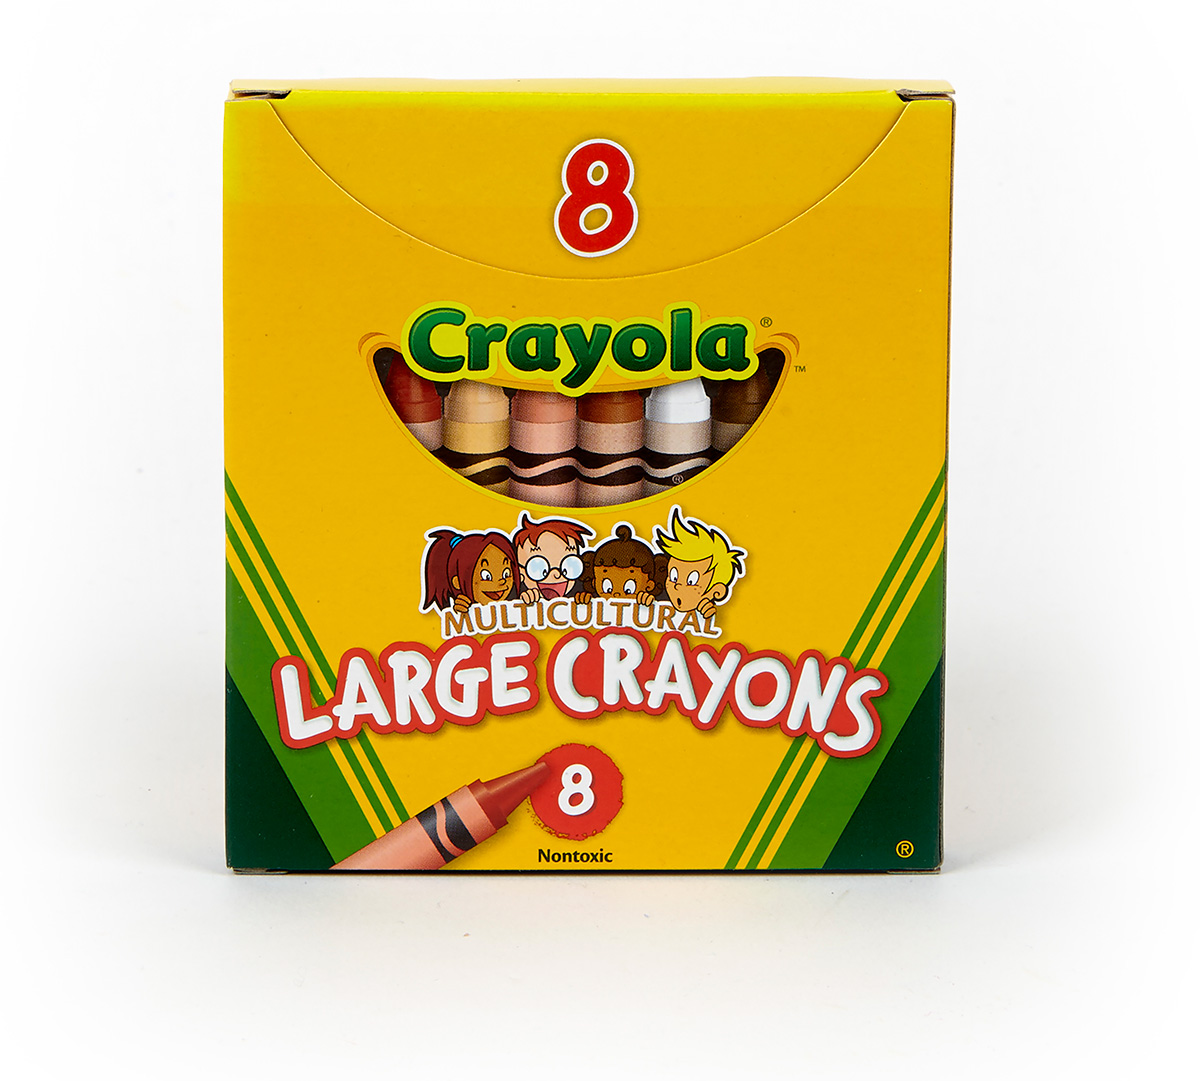 https://shop.crayola.com/on/demandware.static/-/Sites-crayola-storefront/default/dw3a25b4f9/images/52-080W-0-202_Large-Crayons_Multicultural_8ct_F1.jpg